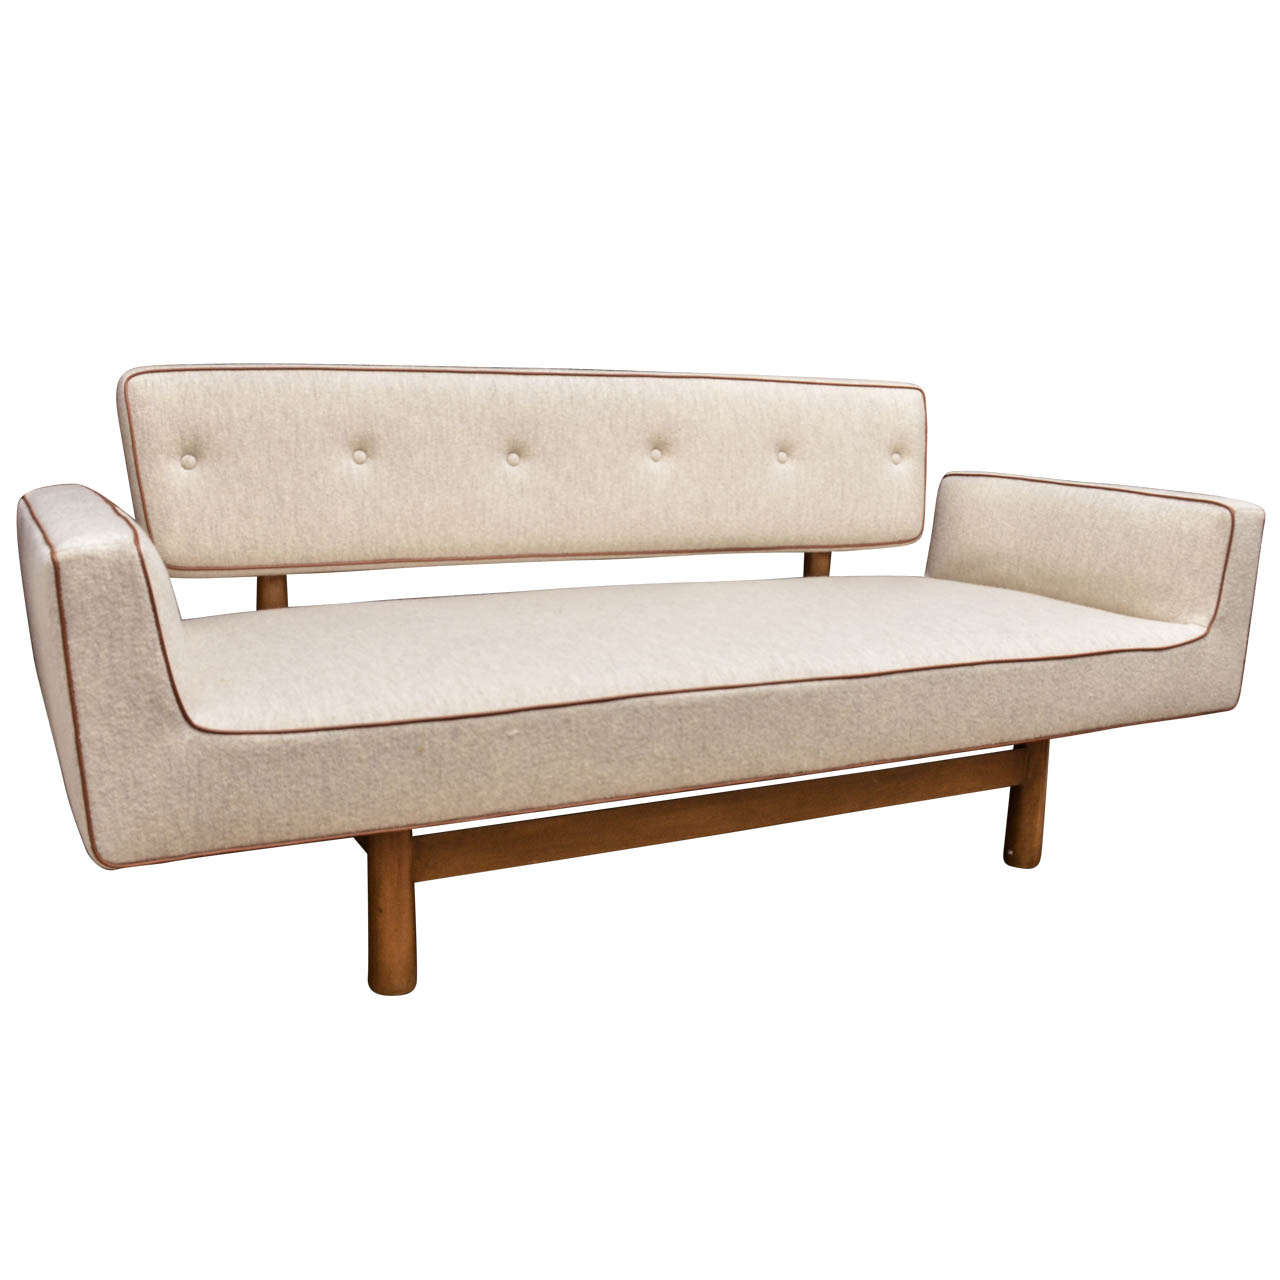 Mid-Century Sofa attributed to Edward Wormley